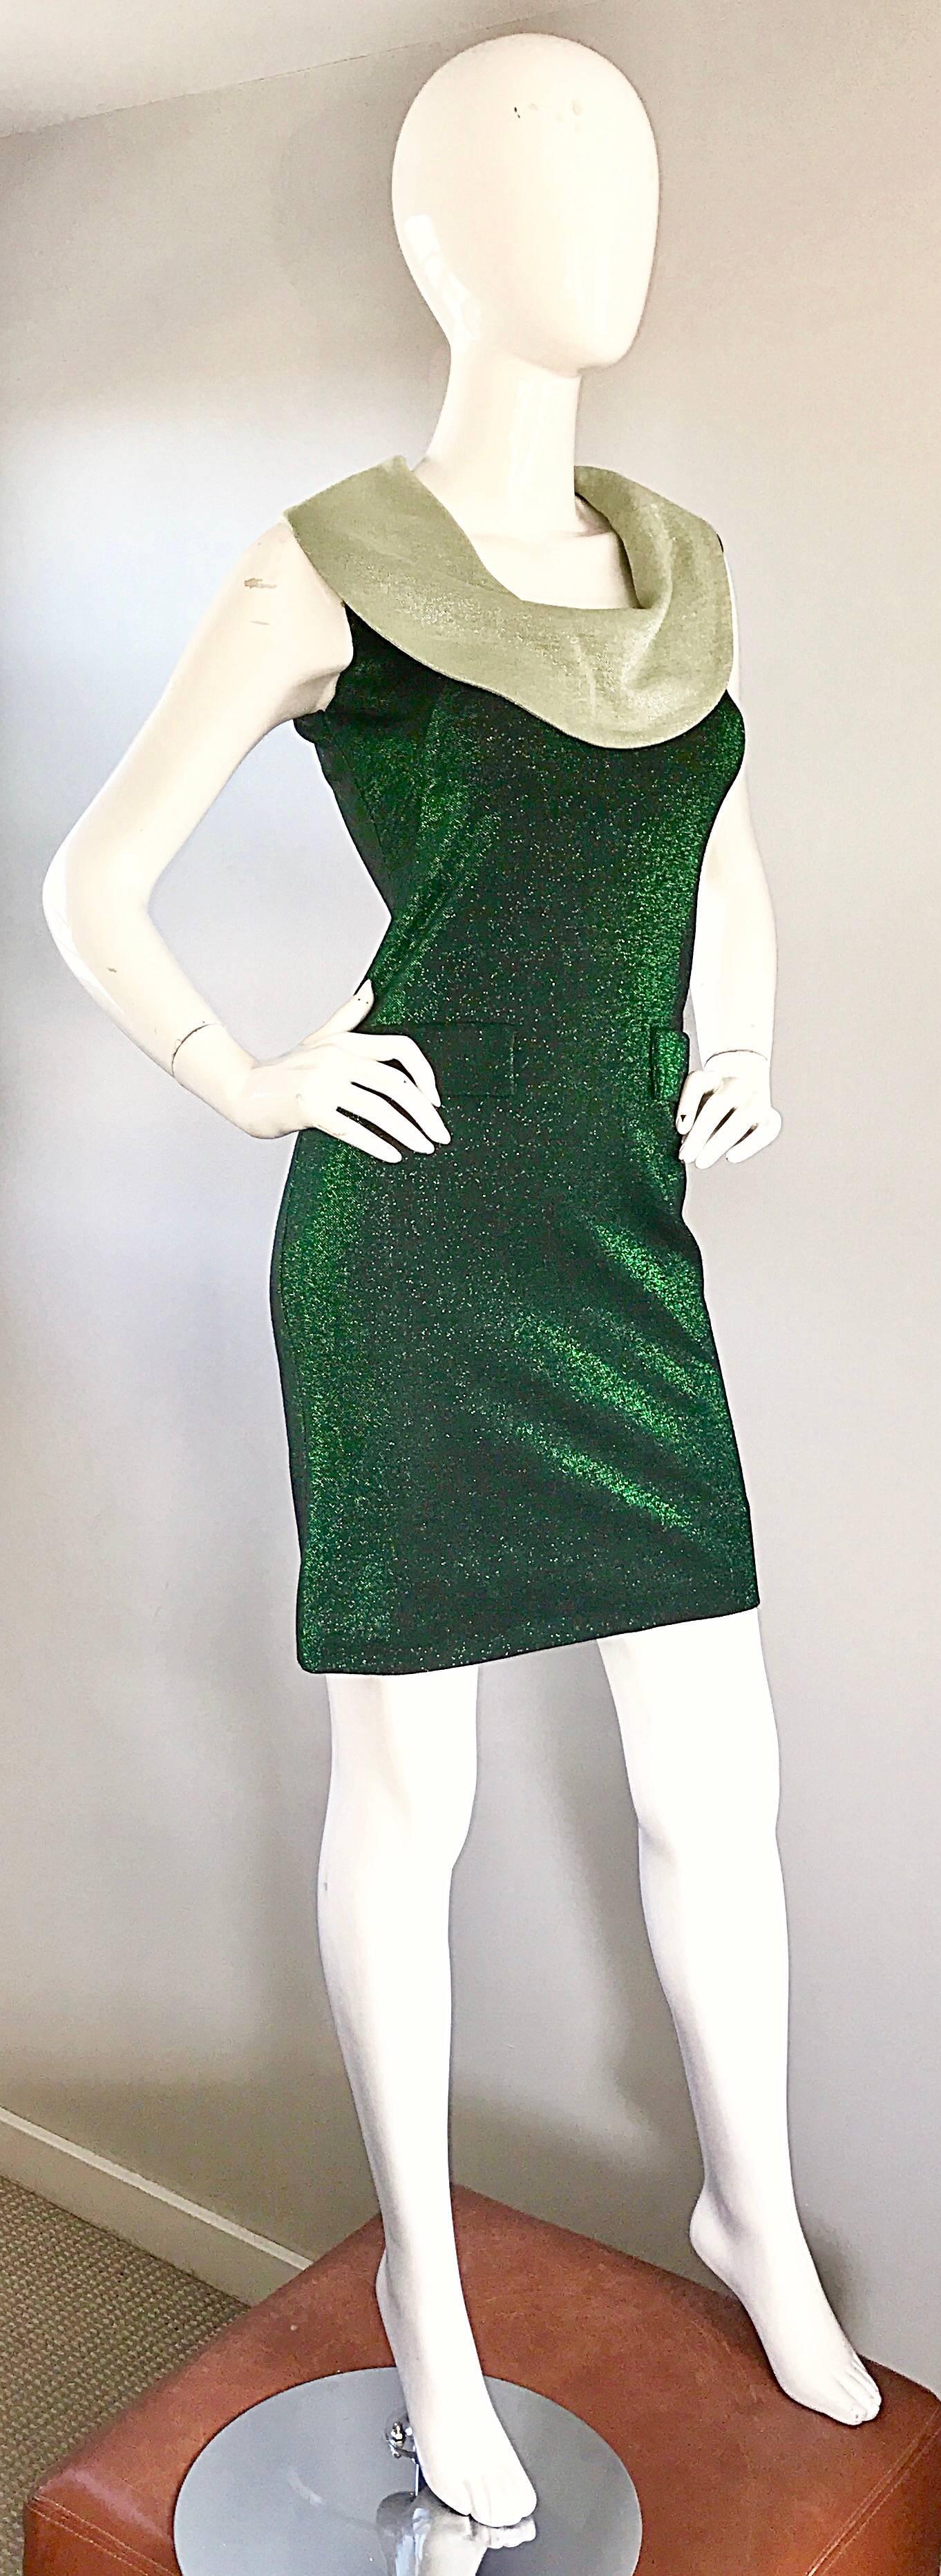 Chic 1960s Metallic Hunter Green + Mint Cowl Neck Vintage 60s Mod Shift Dress In Excellent Condition For Sale In San Diego, CA